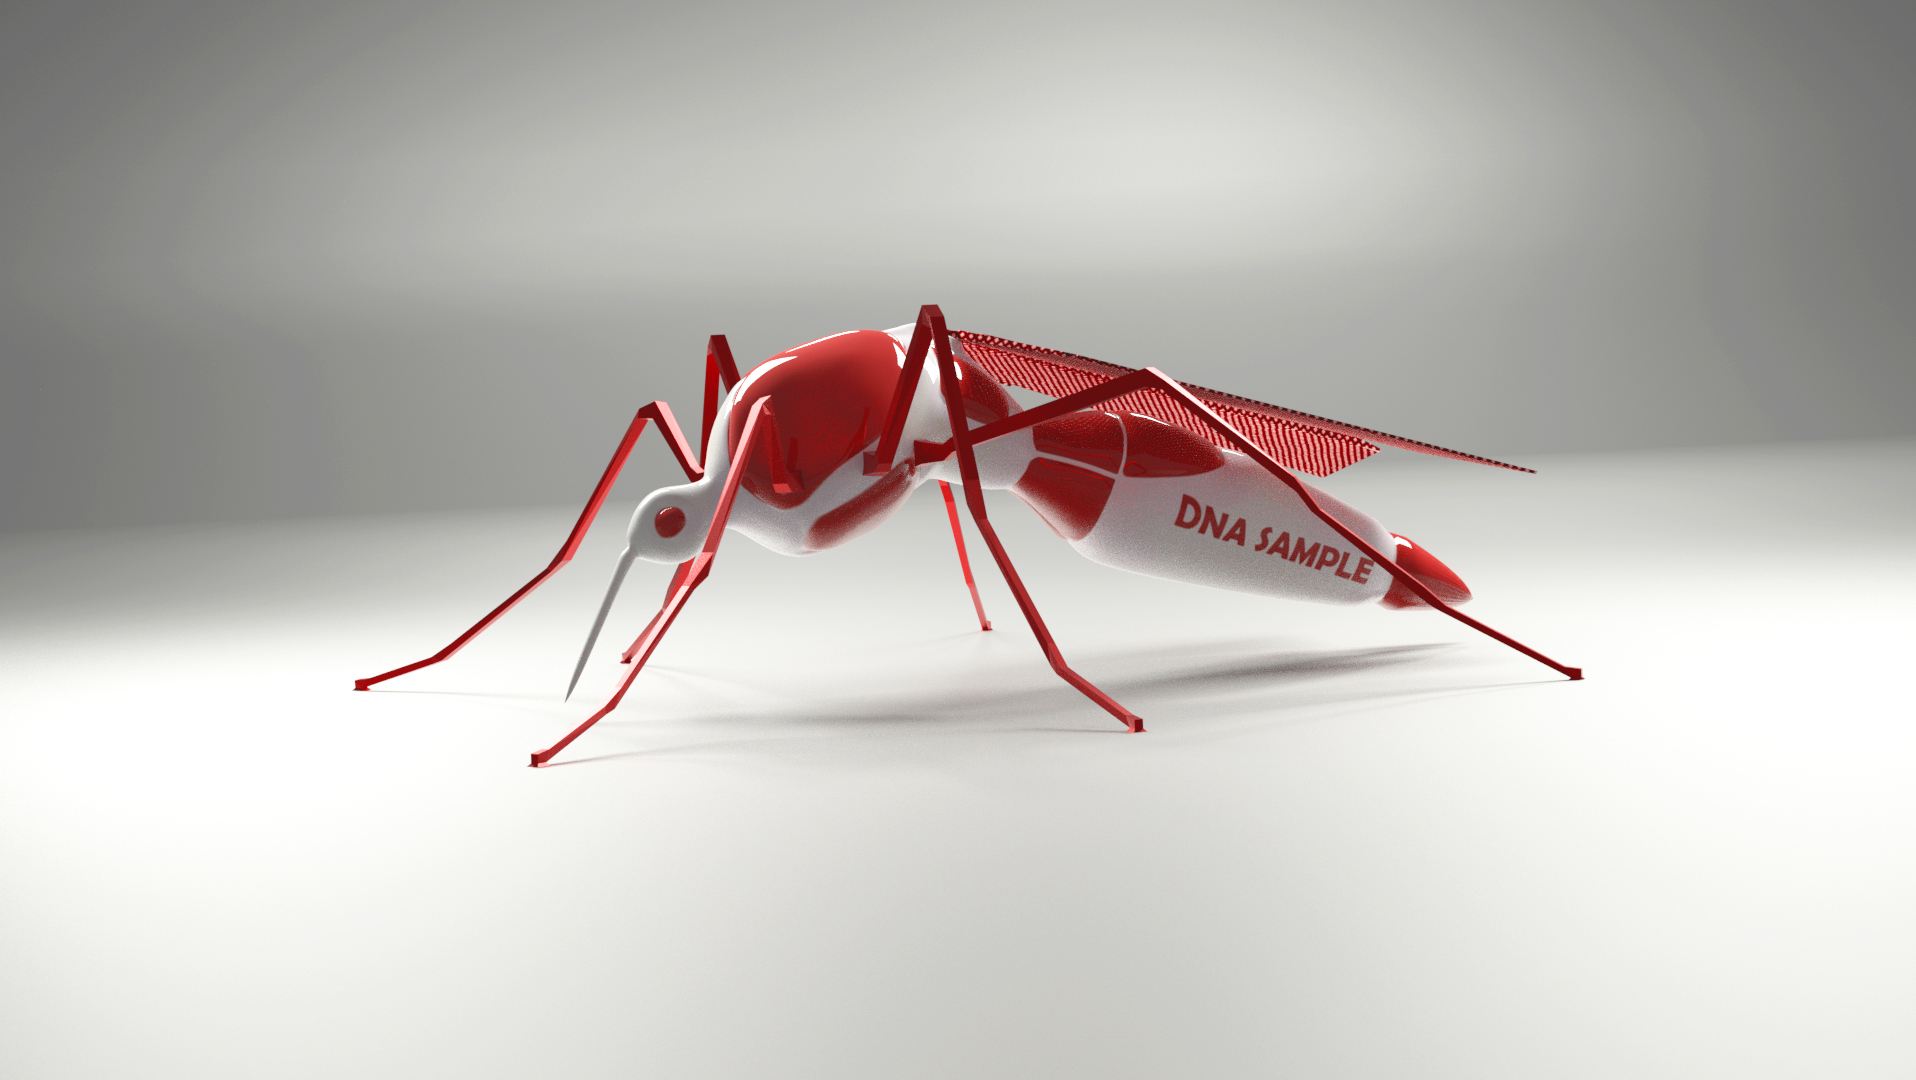 Way Gymnastics Regularity Mosquito drone - Finished Projects - Blender Artists Community